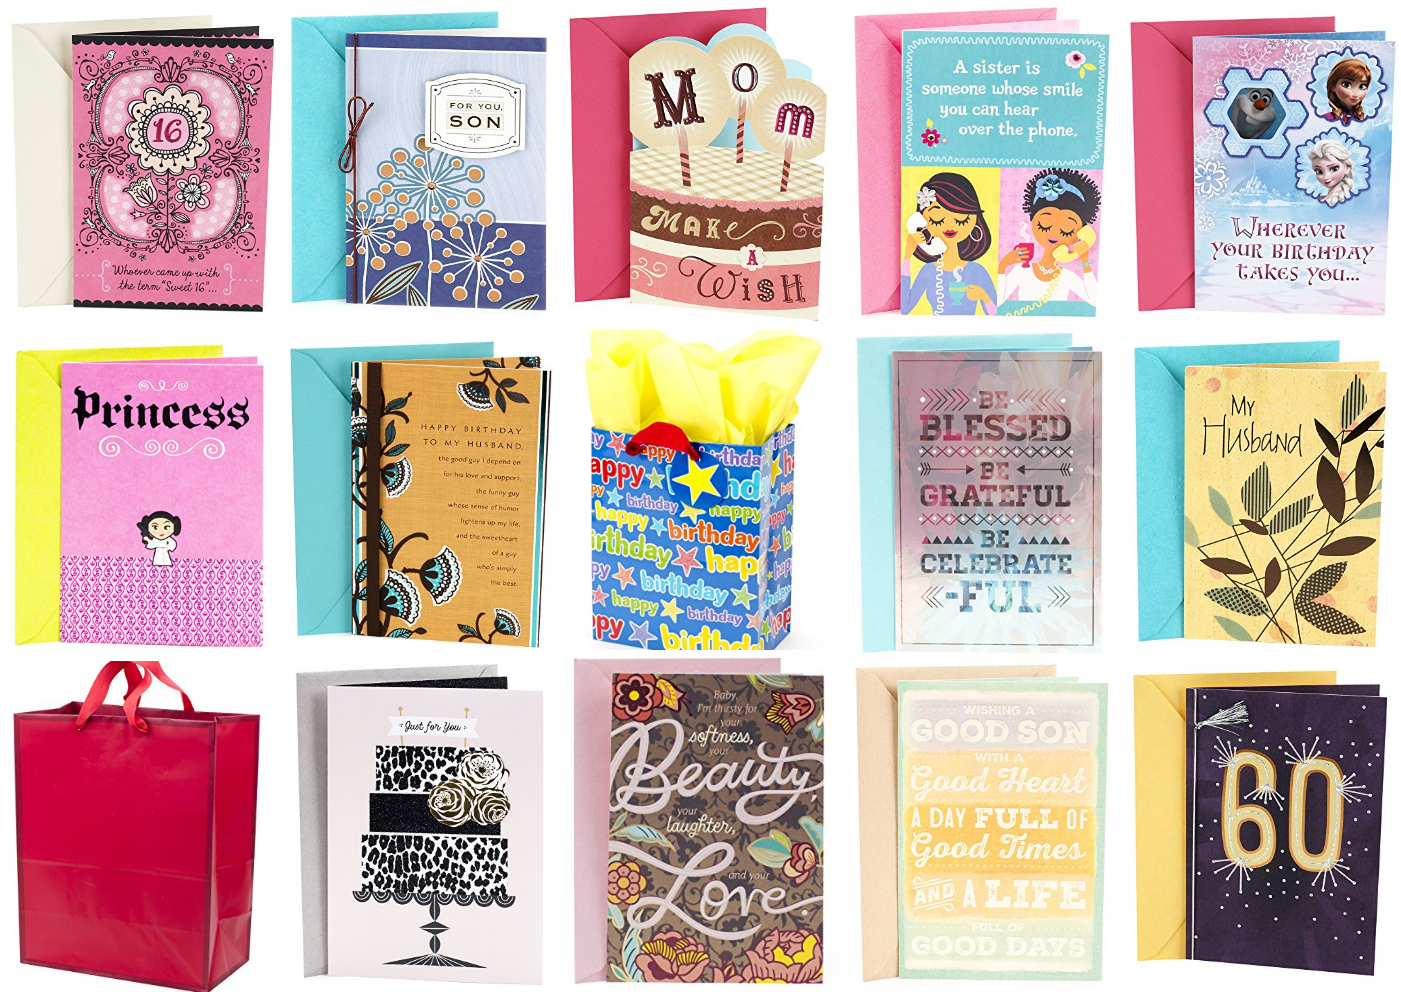 NEW Hallmark Coupons = Stellar Prices on Gift Cards & Gift Bags!